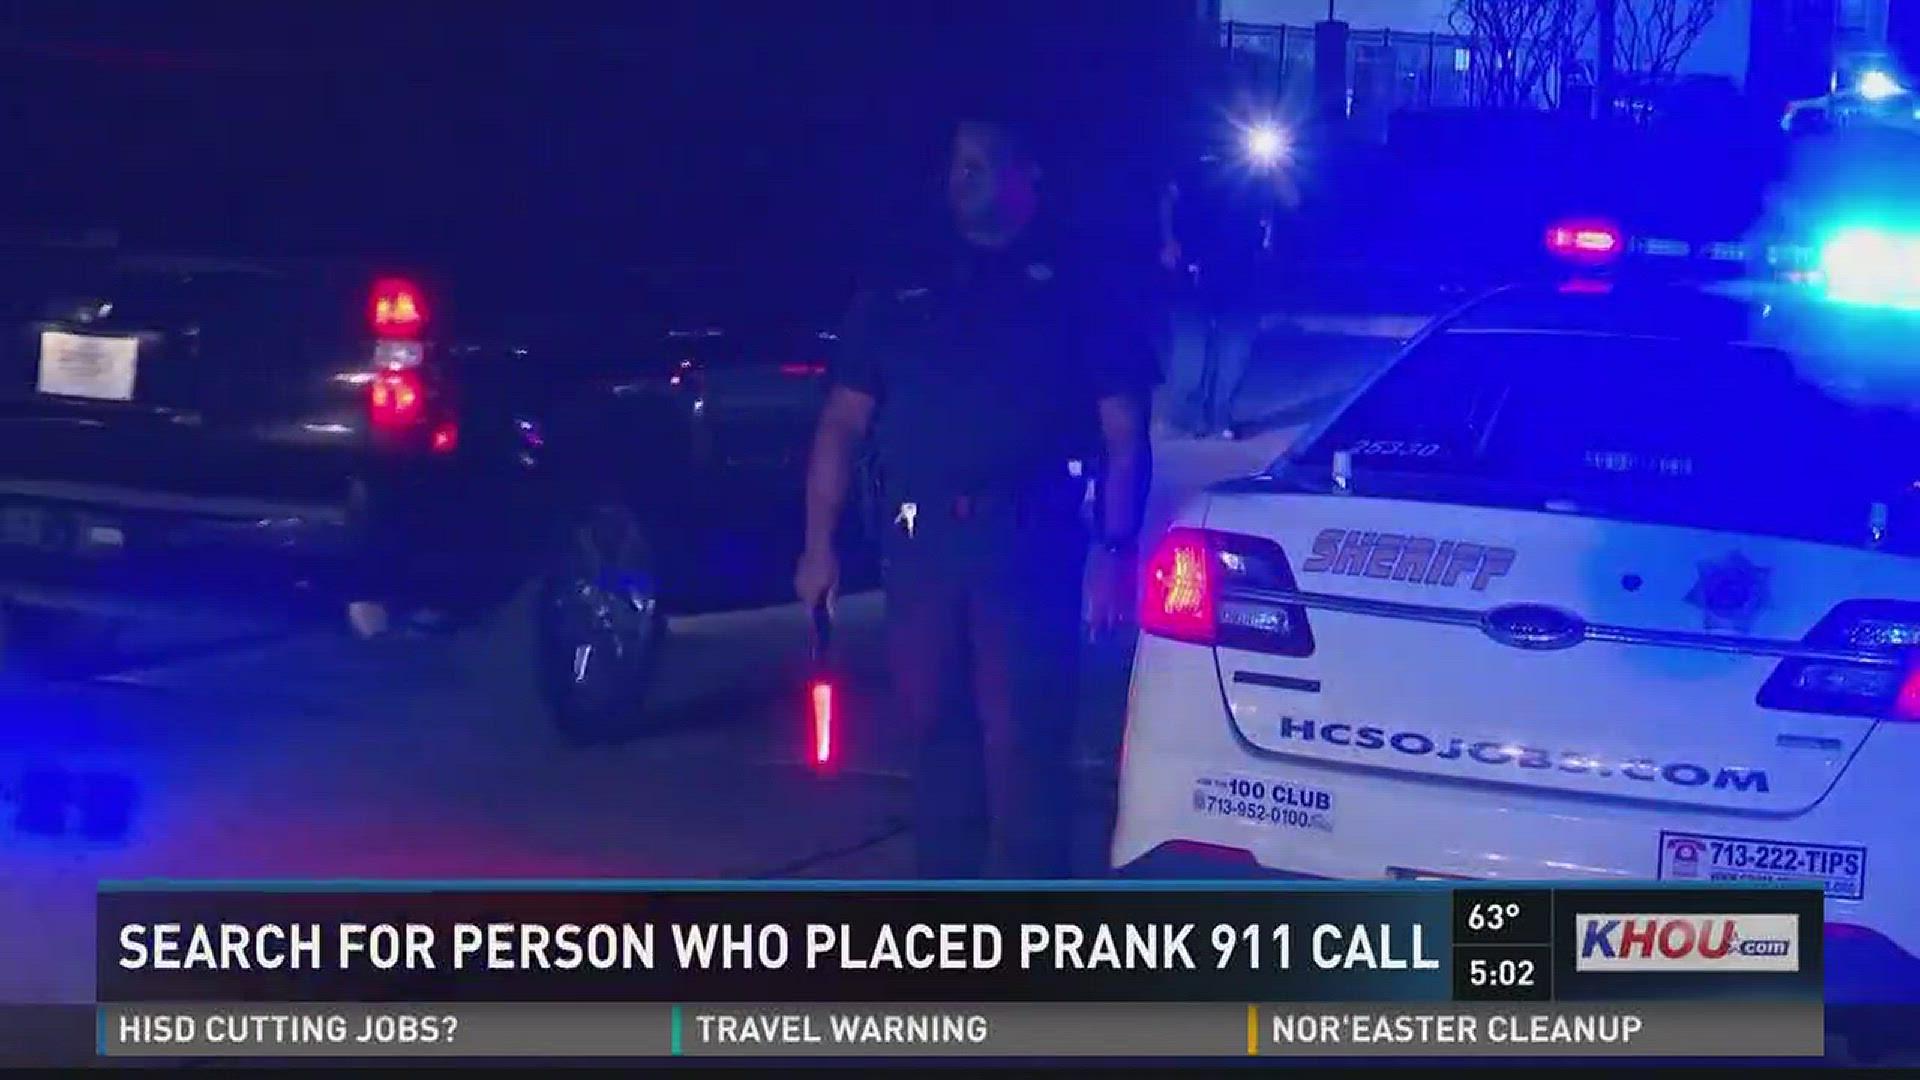 We're learning more about a 911 call that turned out to be bogus, but not before it tied up dozens of officers who thought one of their own had been shot.